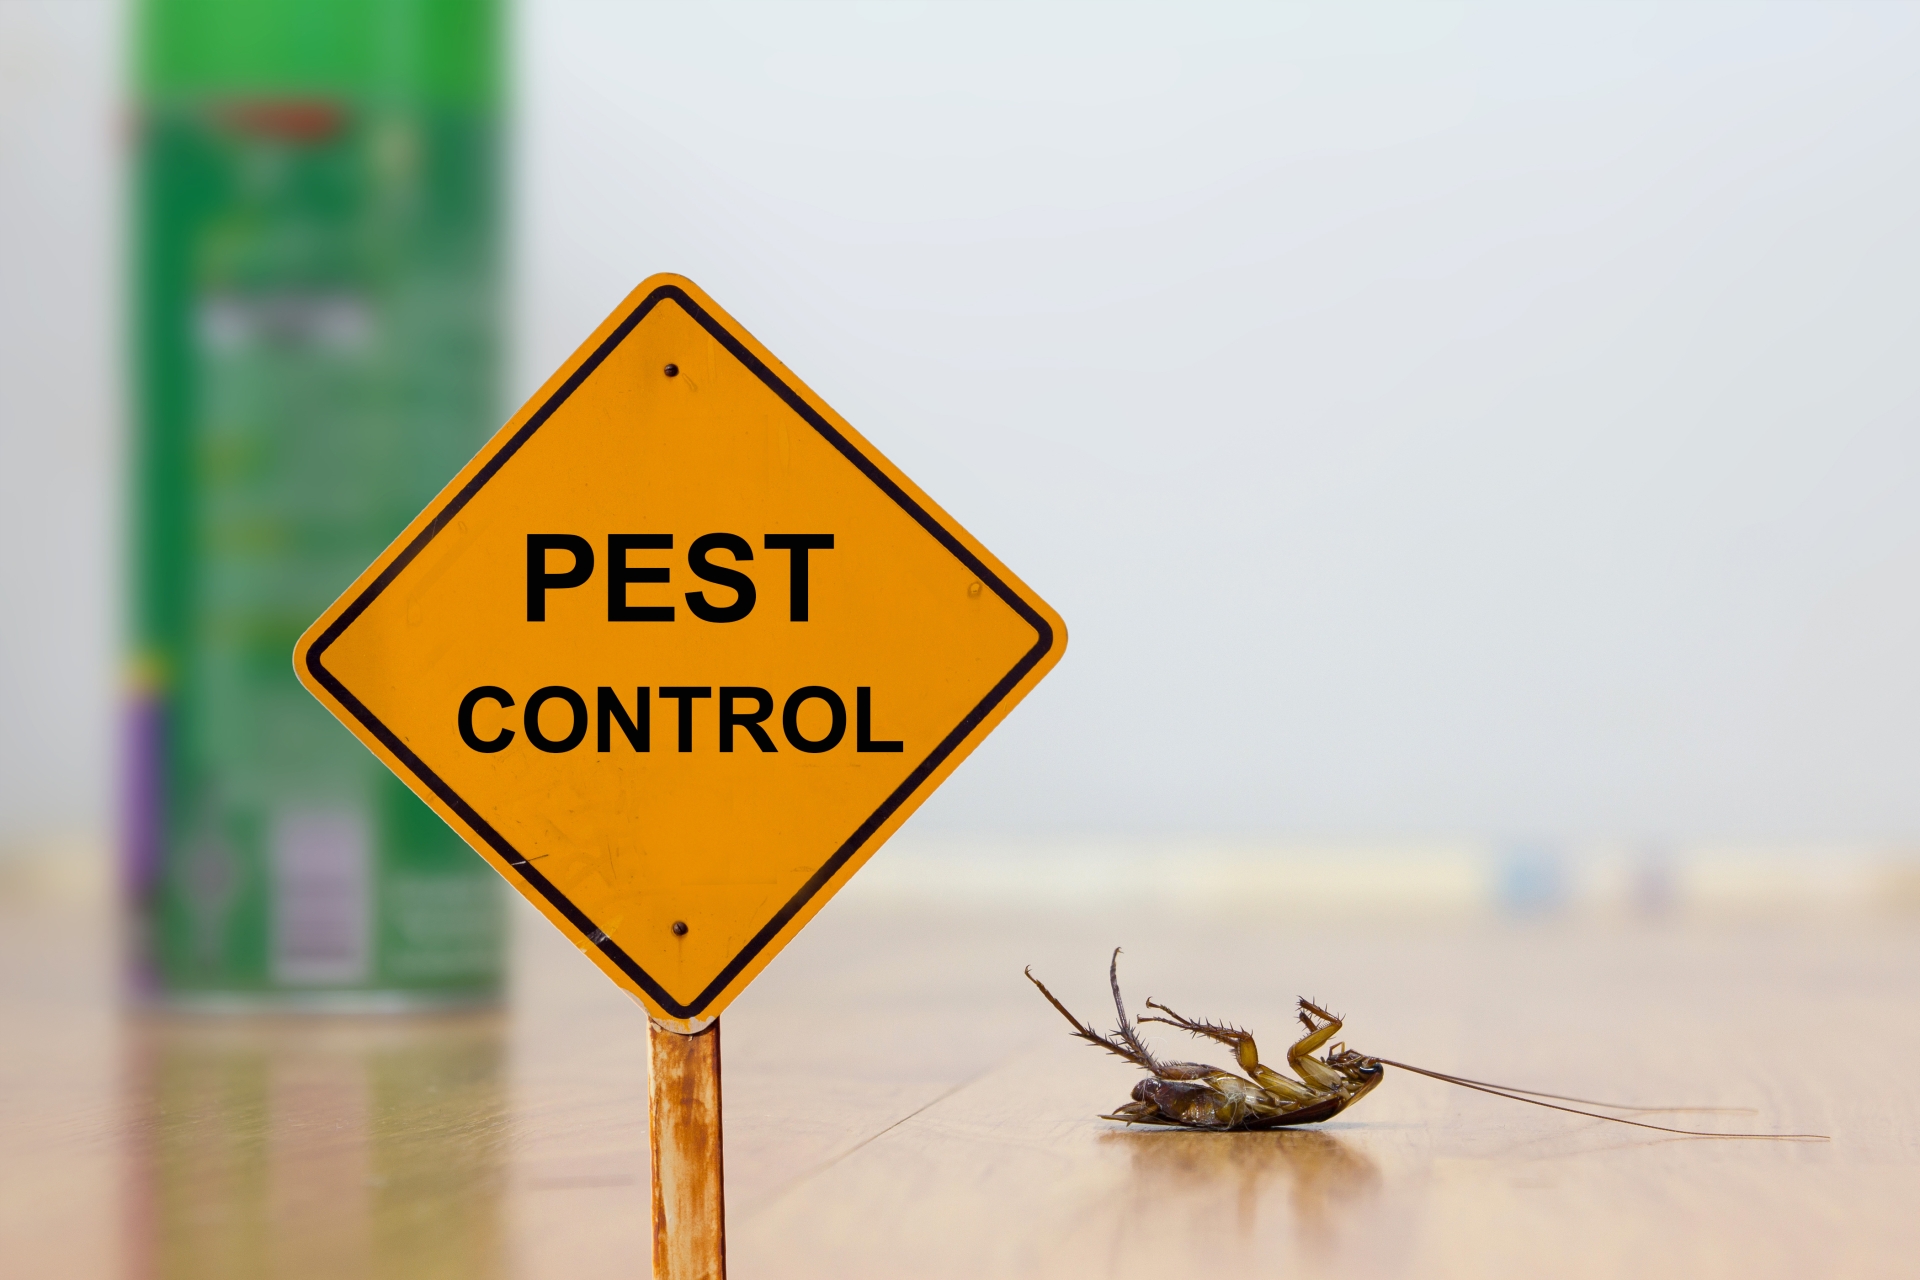 24 Hour Pest Control, Pest Control in Stockwell, SW9. Call Now 020 8166 9746